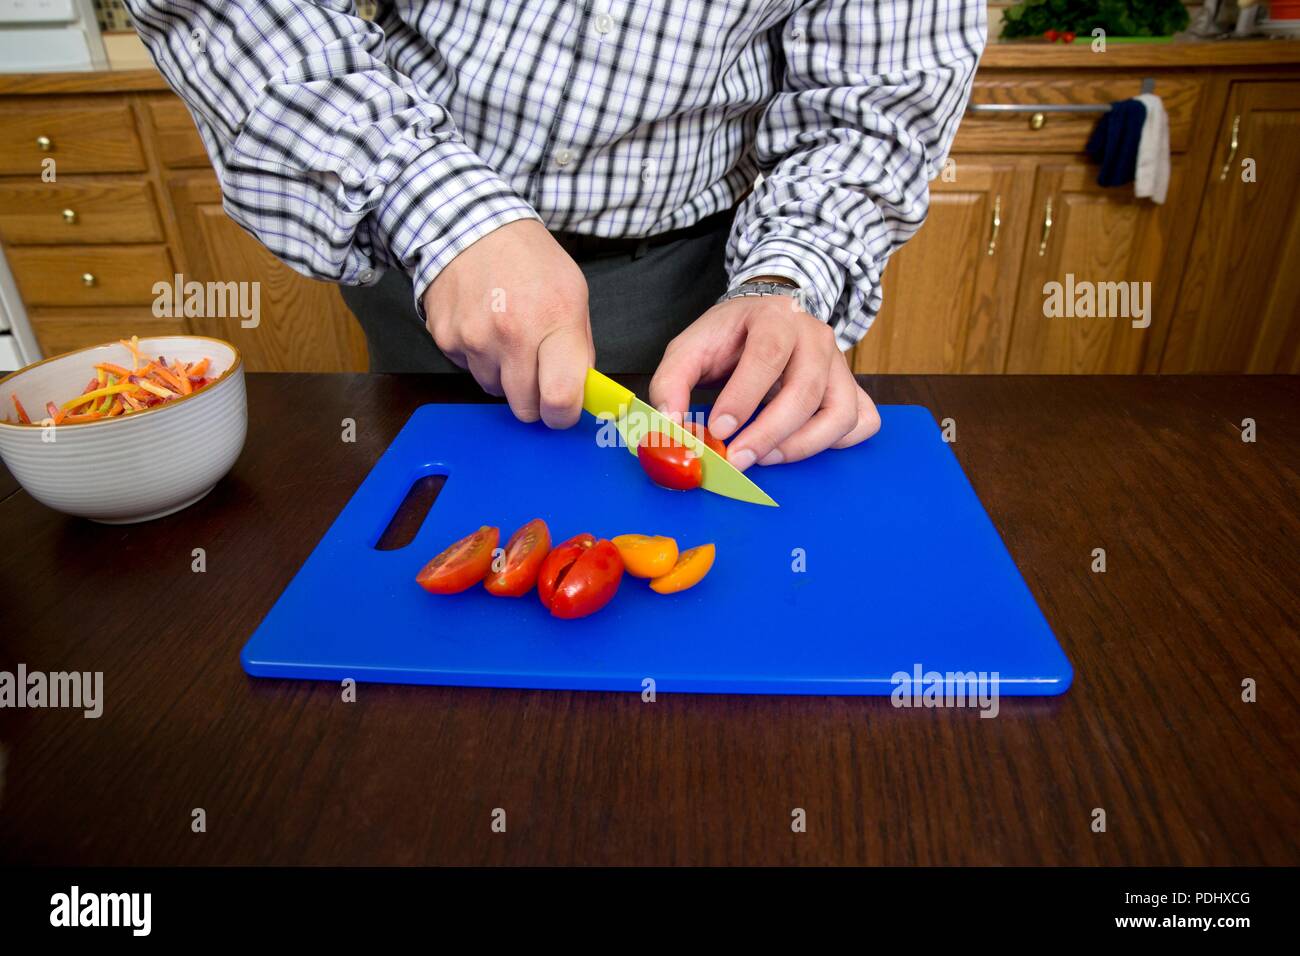 Man slicing tomatoes with a nice on a blue cutting board in a home kitchen Stock Photo